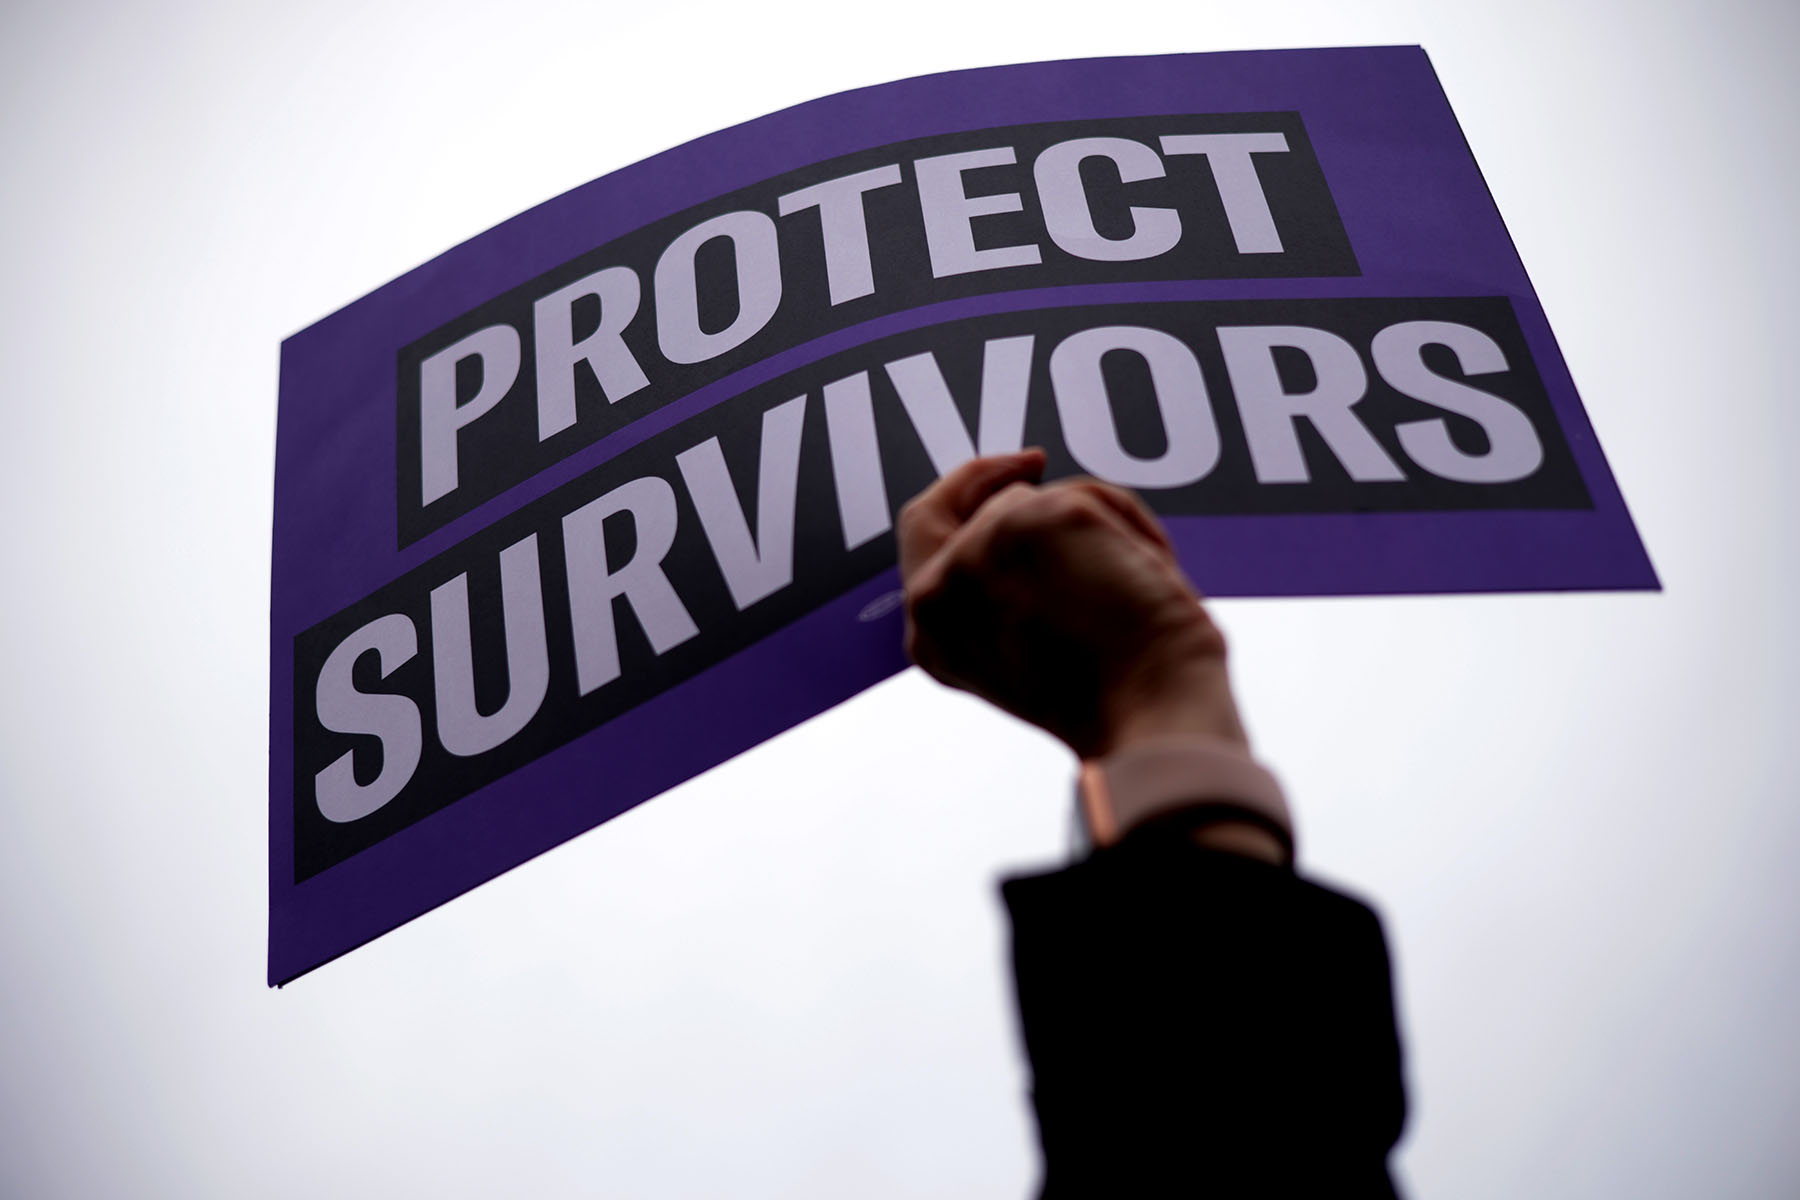 An activist holds up a sign that reads "Protect Survivors" outside U.S. Supreme Court during a gun-control rally.